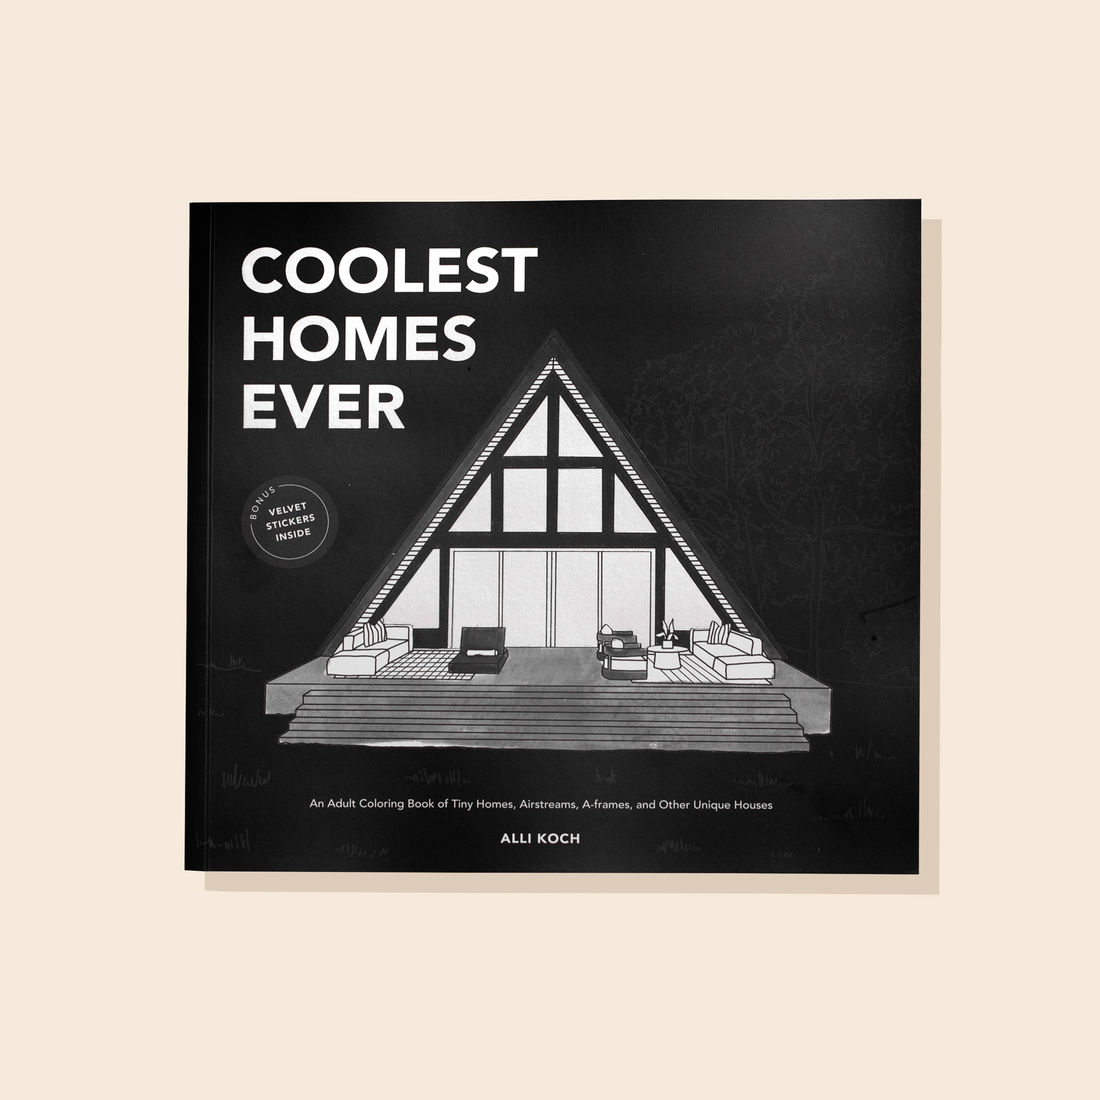 Coolest Homes Ever | an Adult Coloring Book of Tiny Homes